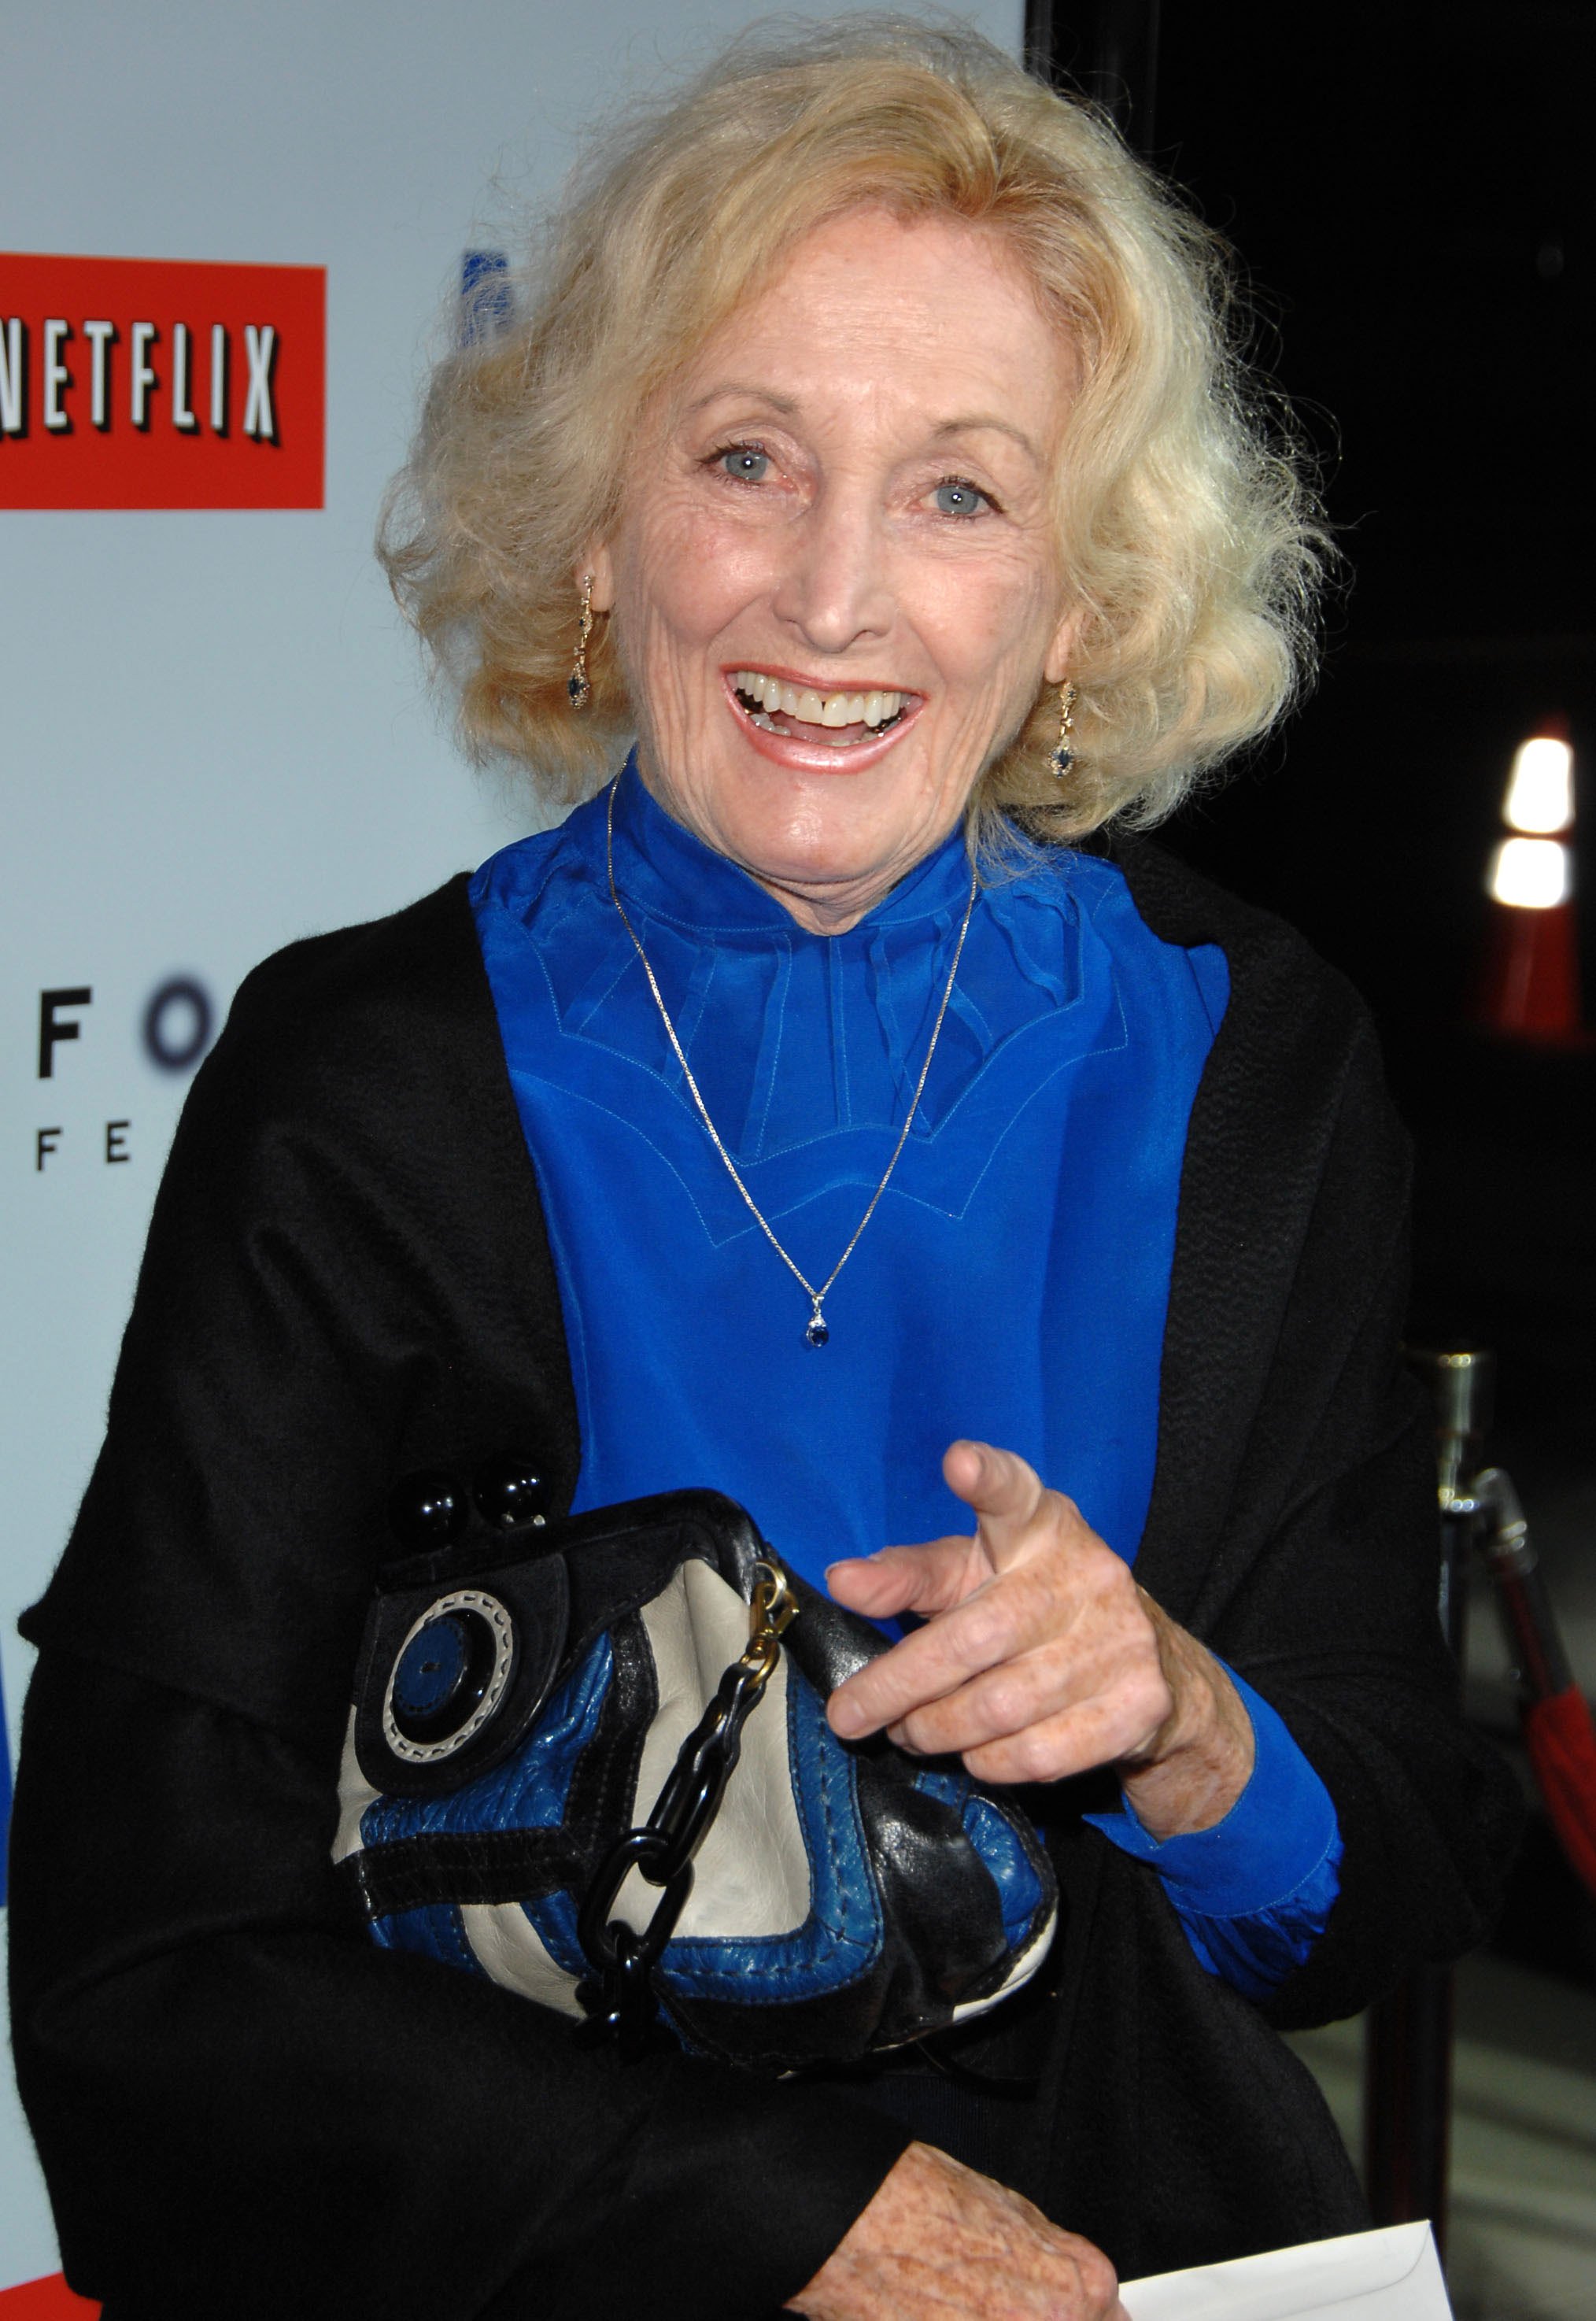 Eileen Ryan at the premiere of "Milk" on November 13, 2008 in California |  Source: Getty Images 